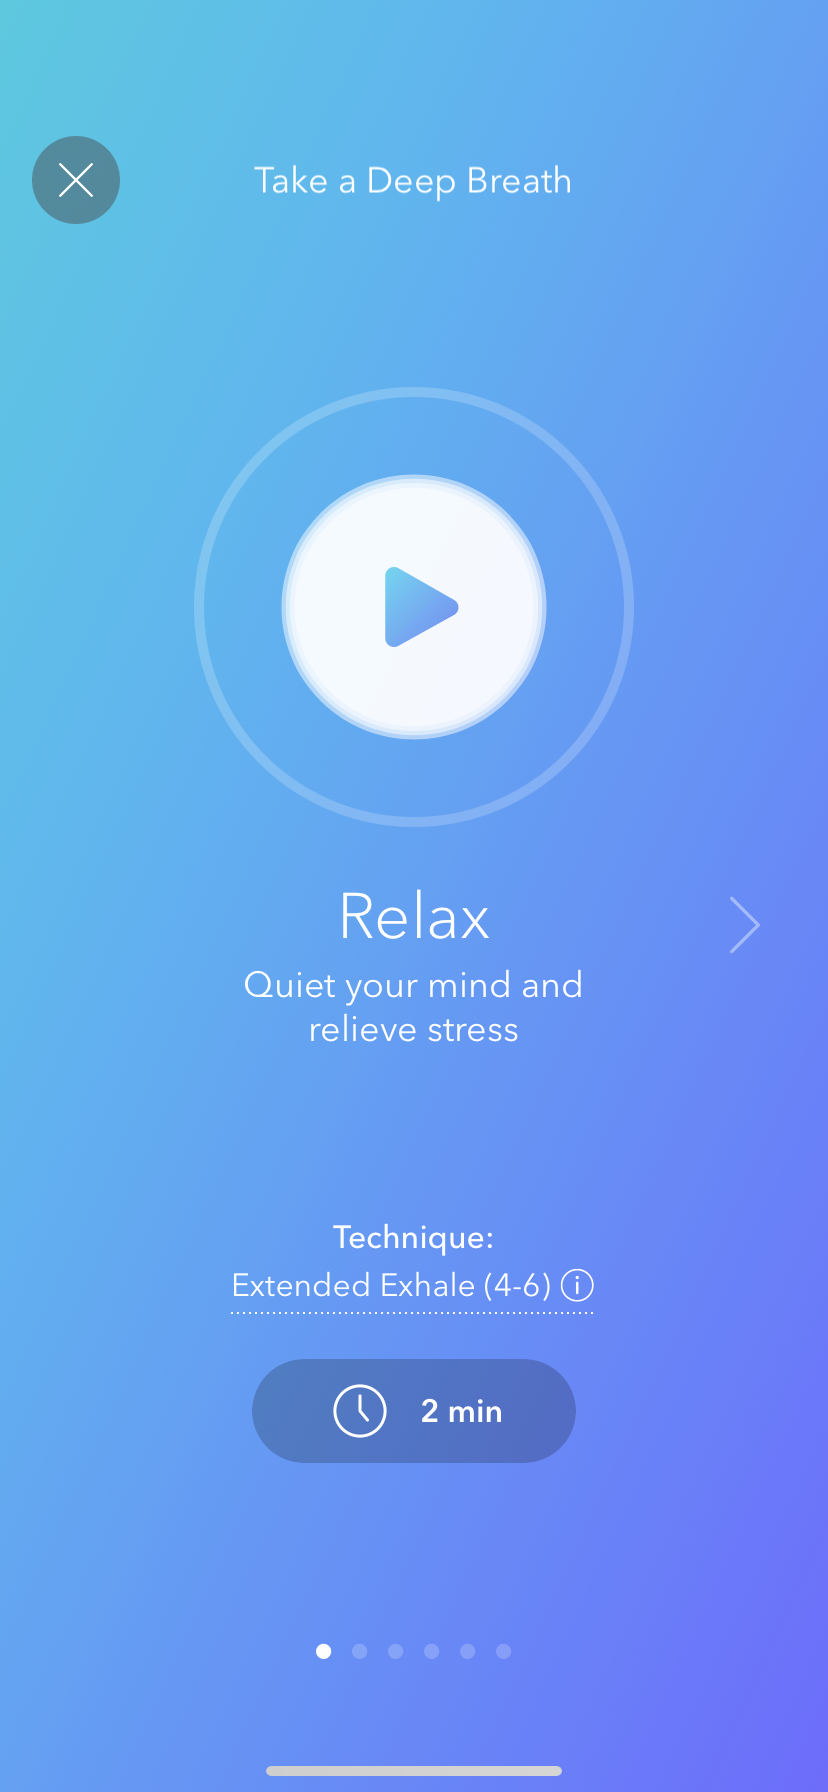 Image shows a breathing exercise inside Calm